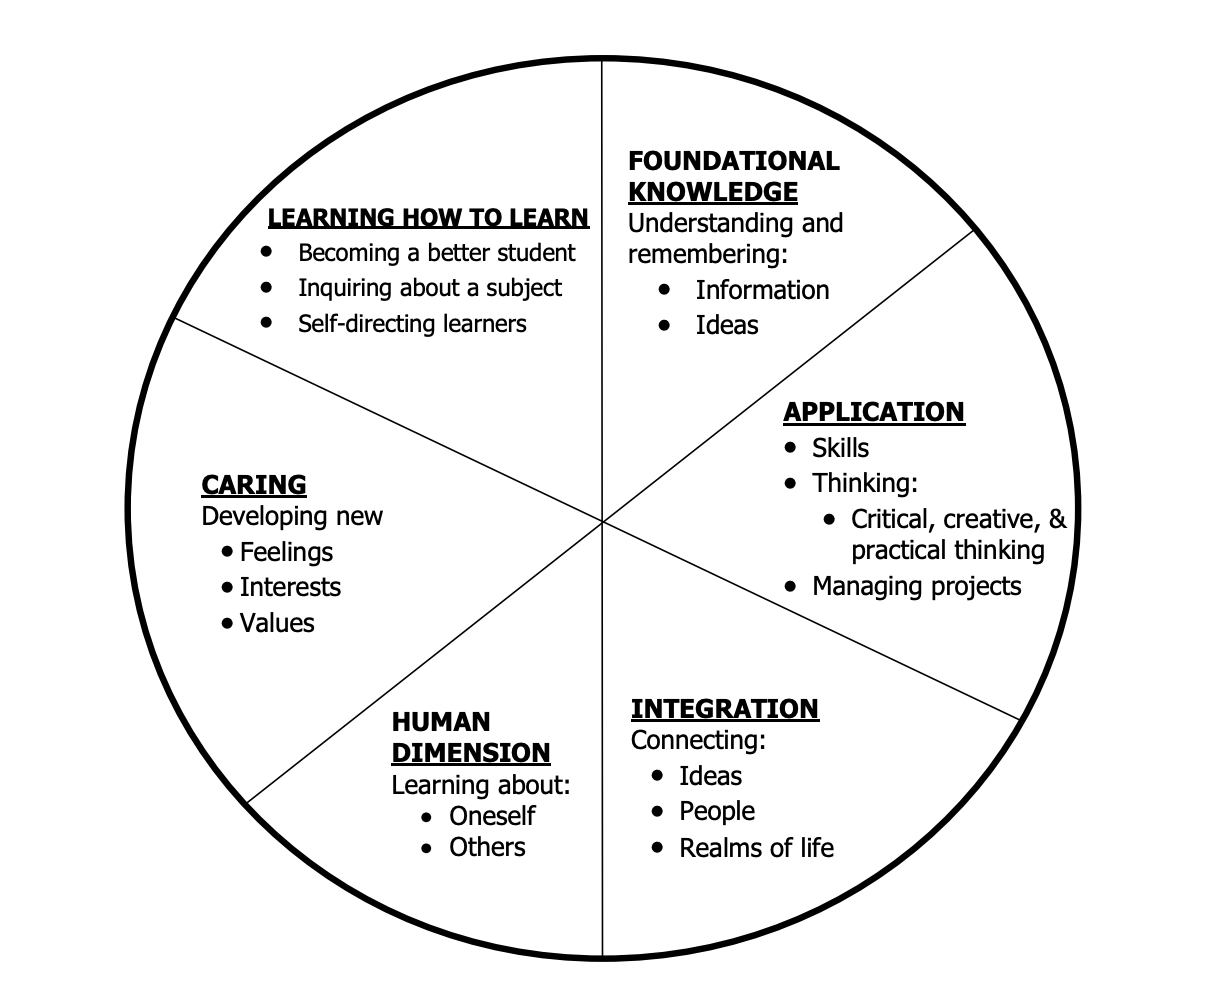 Image Credit: Fink, D. L. (2005) A Self-Directed Guide to Designing Courses for Significant Learning. https://www.deefinkandassociates.com/GuidetoCourseDesignAug05.pdf Image